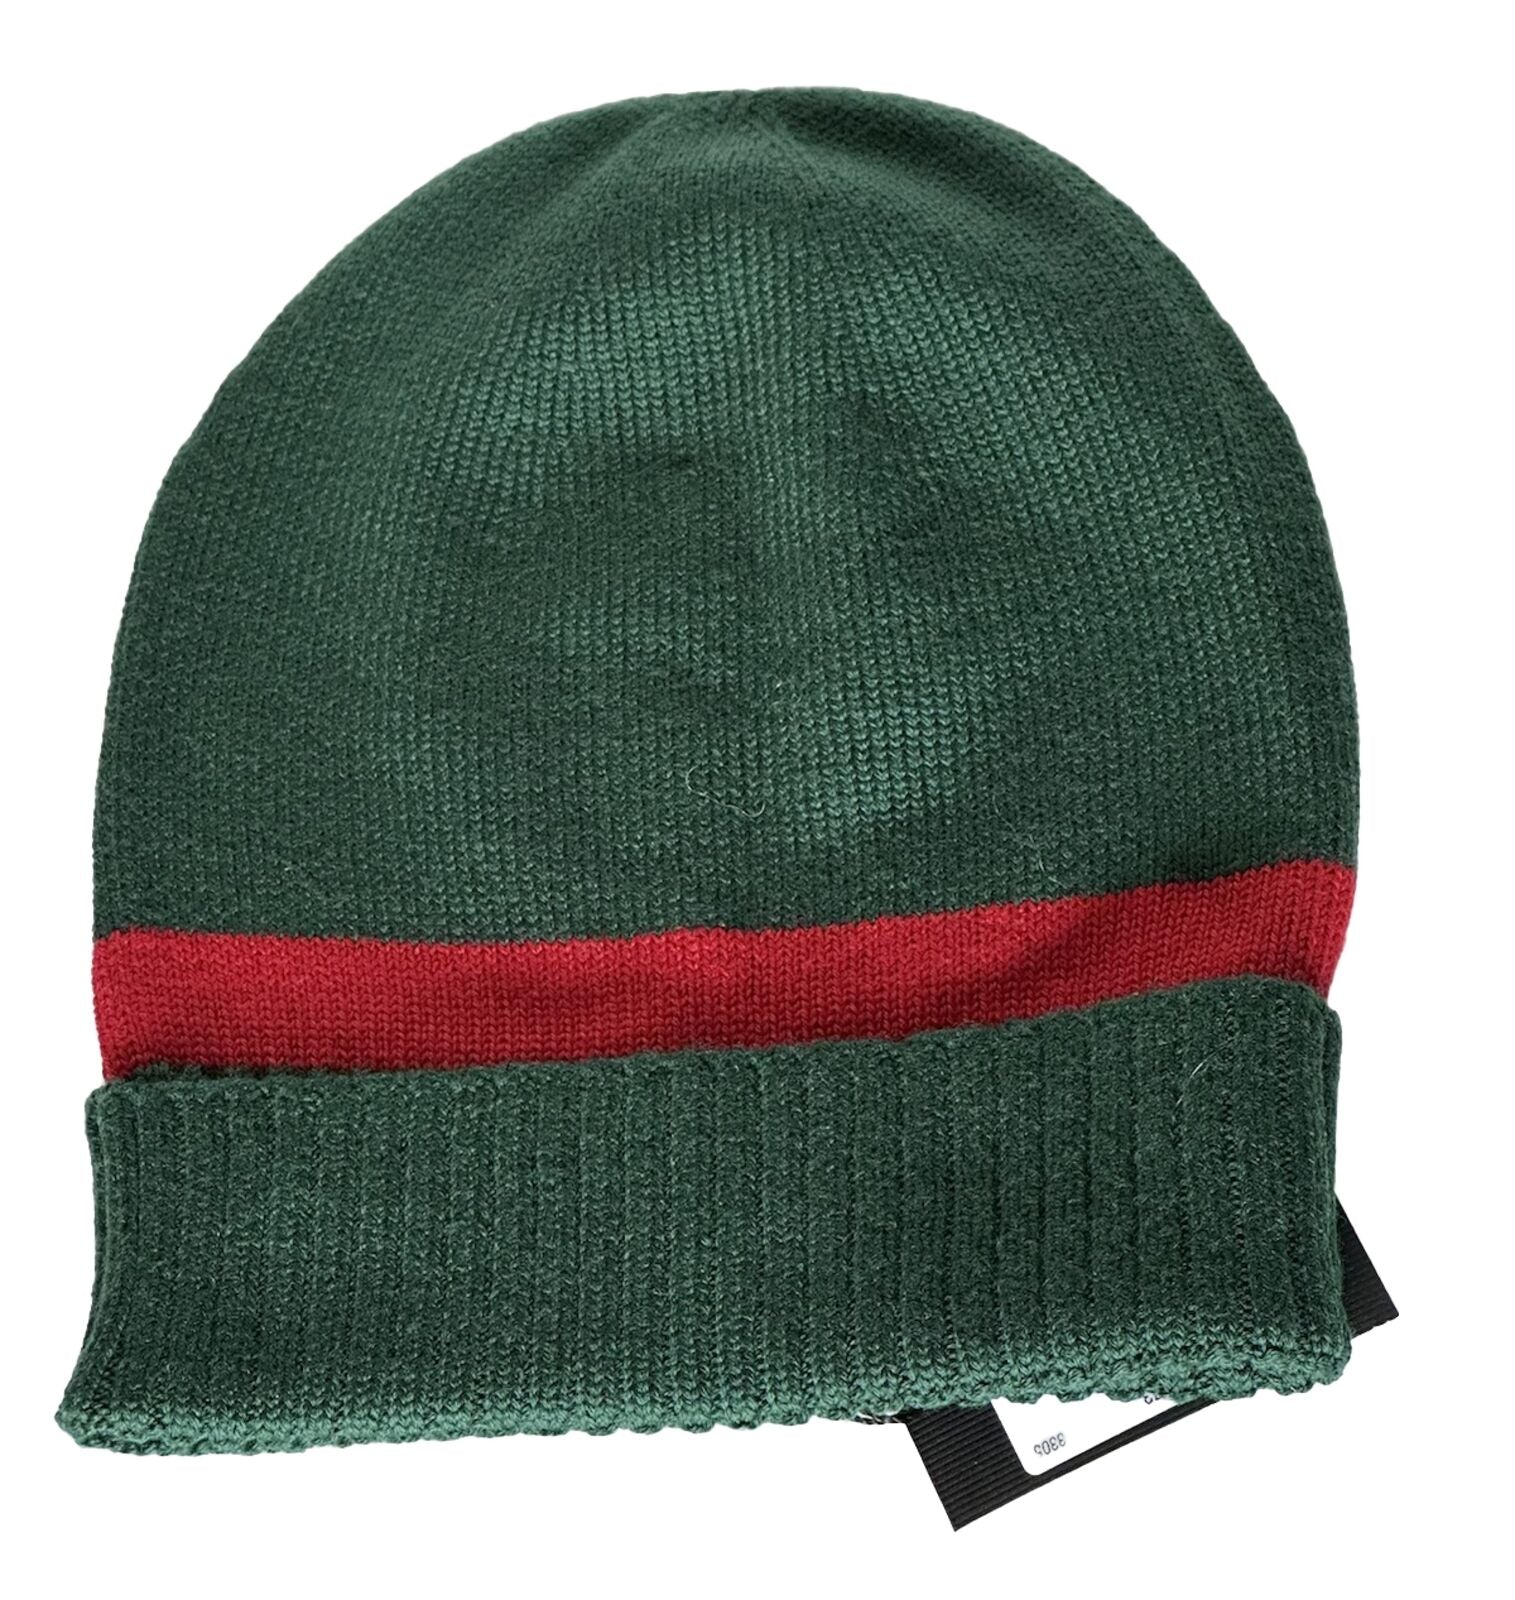 NWT Gucci Knit Wool Green/Red Beanie Hat Medium (58 cm) Made in Italy 494598